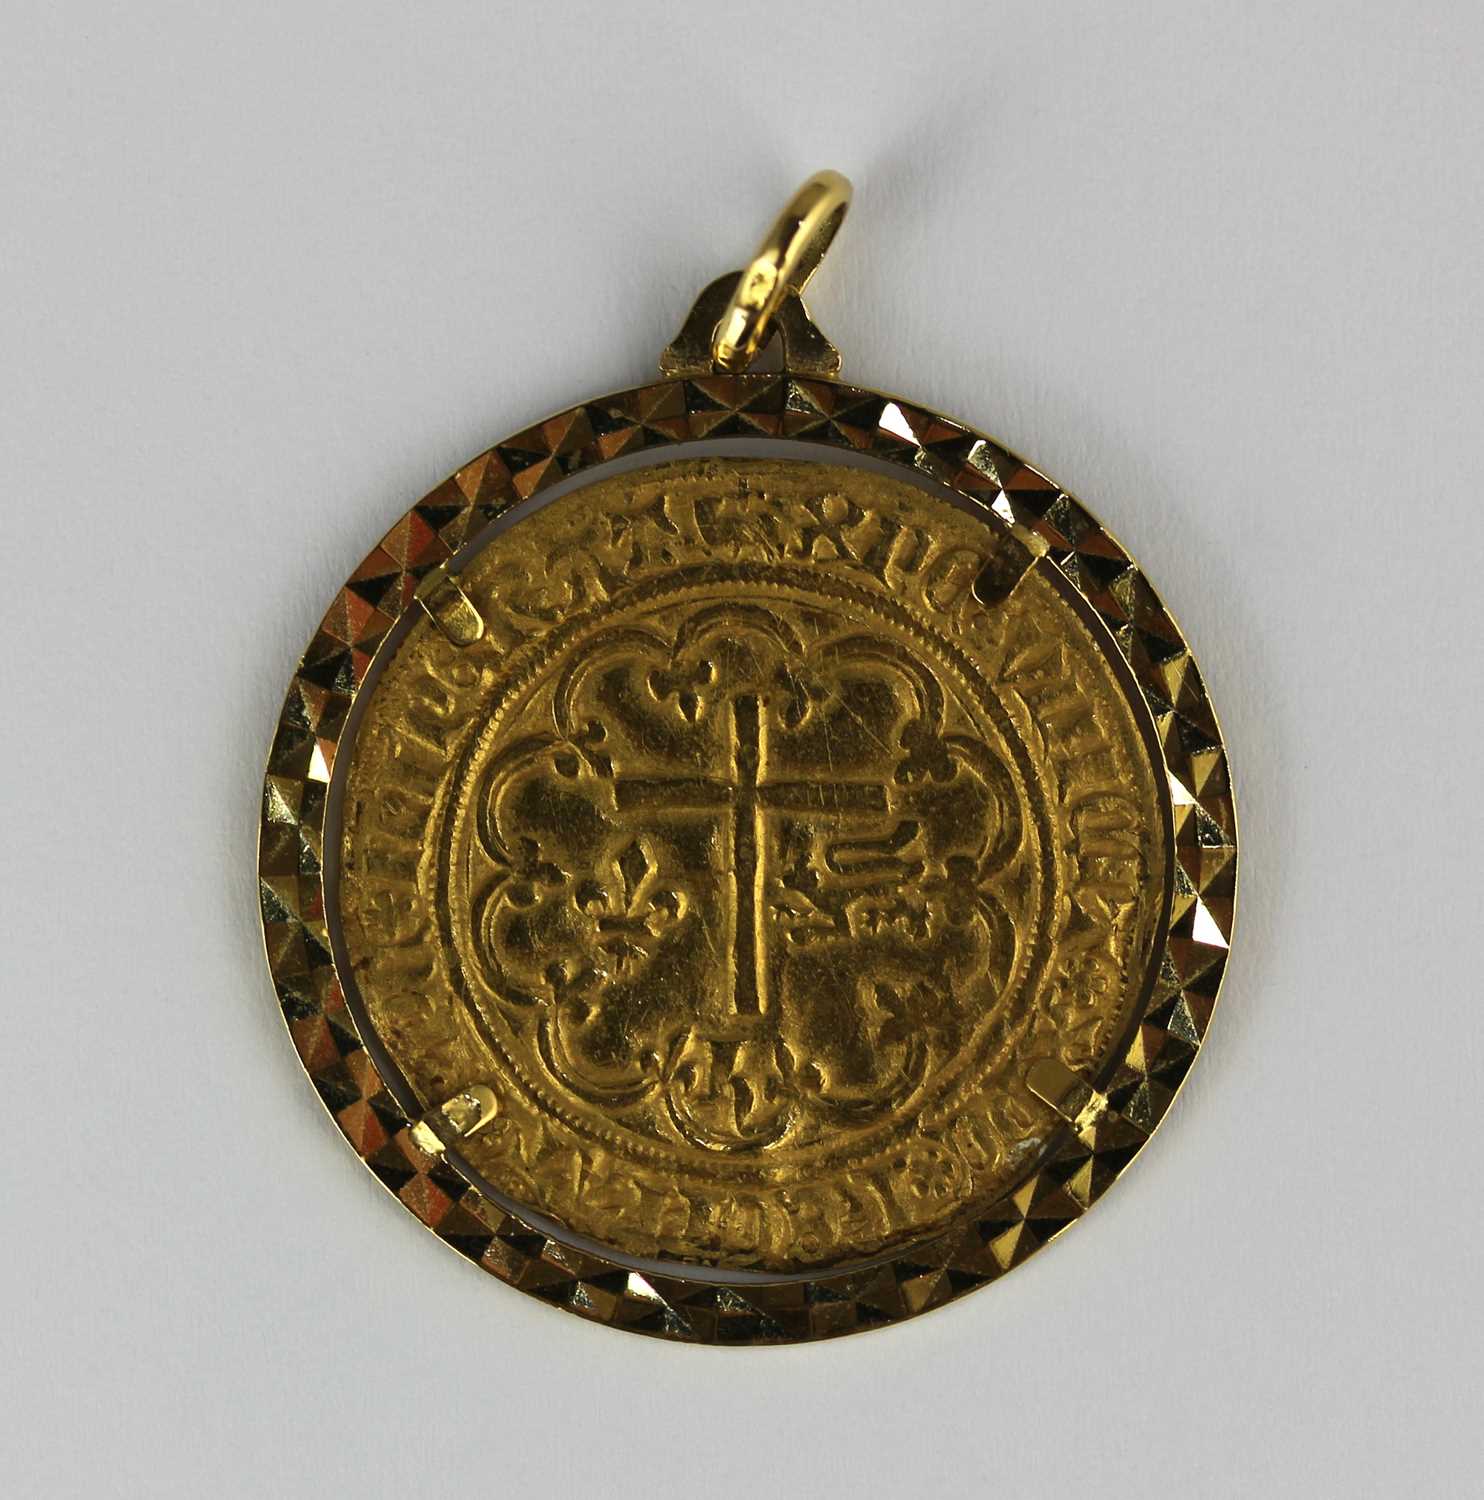 A French gold coin; Henry VI Salut d'or Amiens Mint, mint mark Paschal lamb, mounted as a pendant - Image 2 of 2